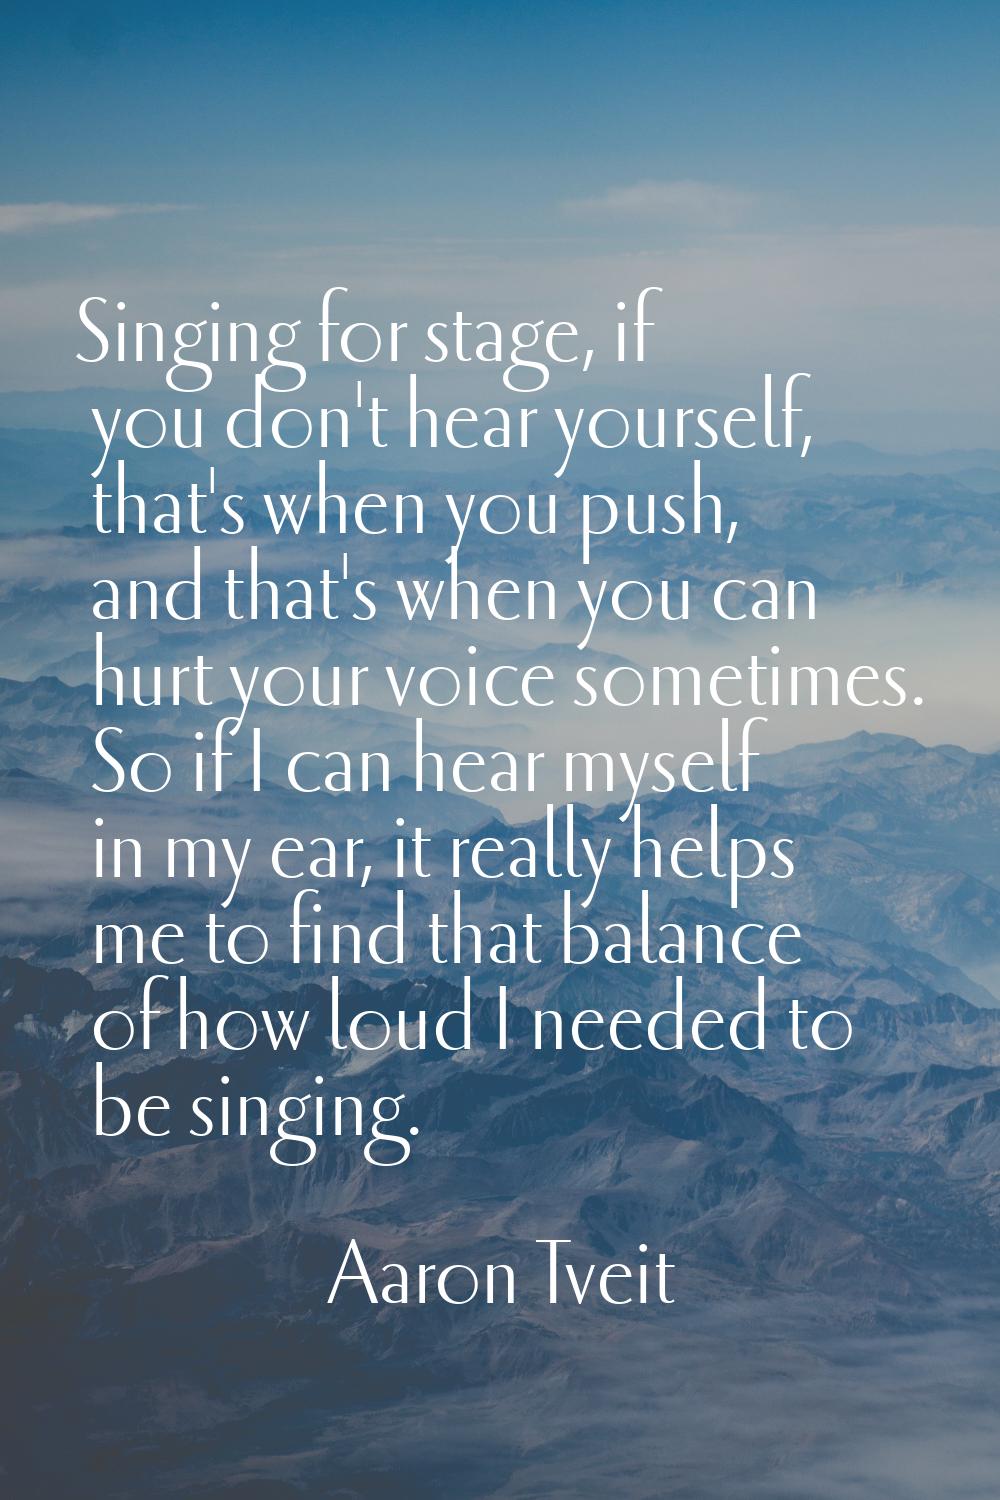 Singing for stage, if you don't hear yourself, that's when you push, and that's when you can hurt y